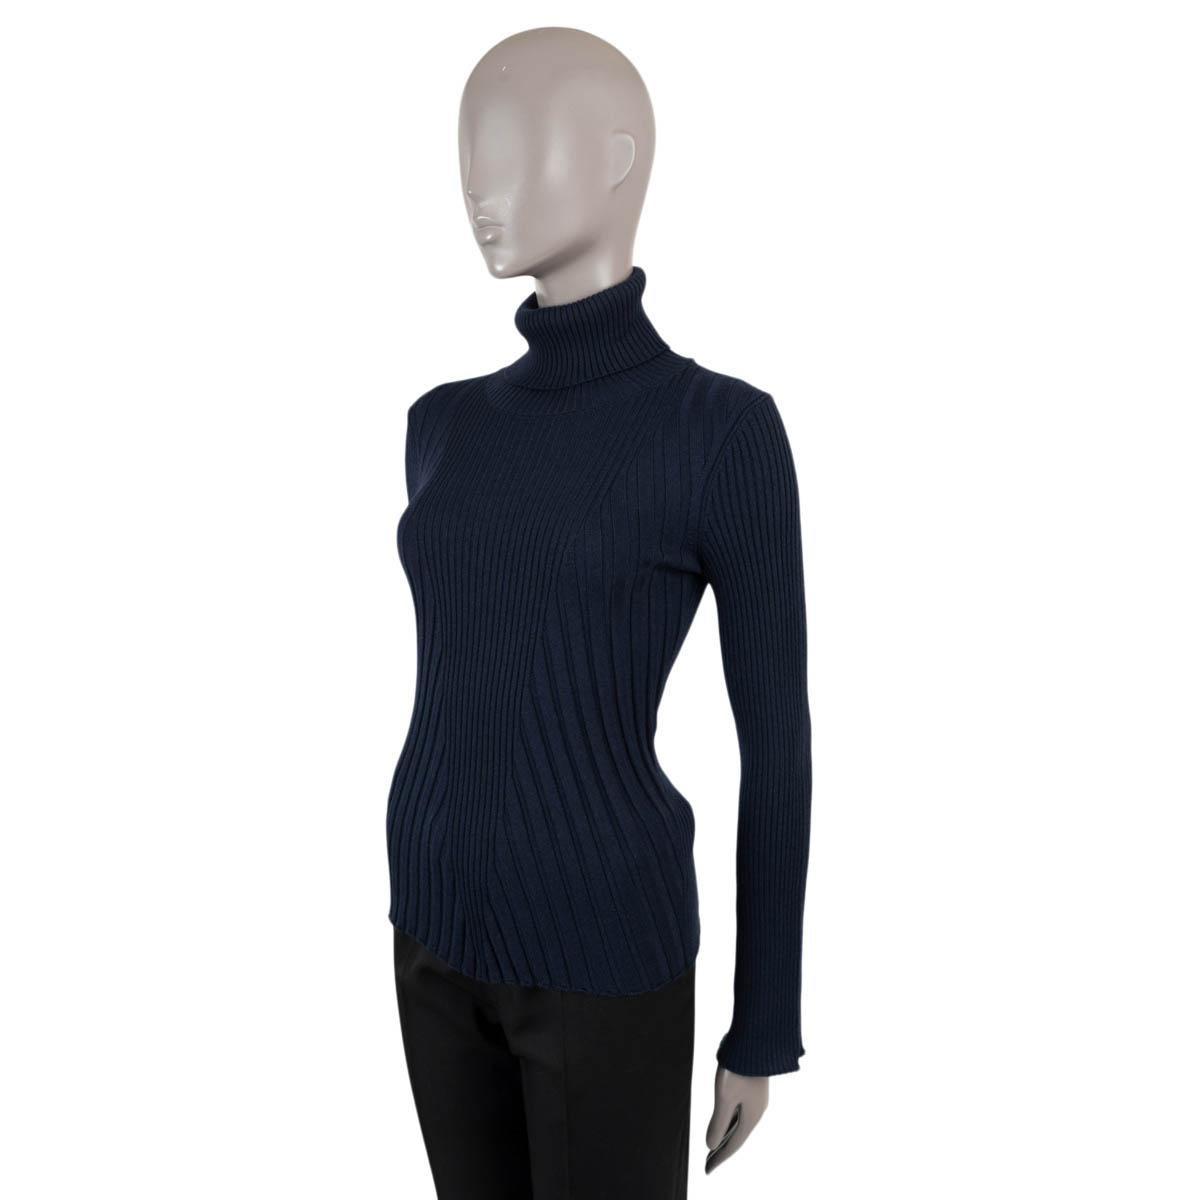 100% authentic Louis Vuitton rib-knit turtleneck sweater in navy blue soft wool (100%). A Monogram canvas tab adds an iconic signature detail to the right cuff. Has been worn and is in virtually new condition.

Measurements
Tag